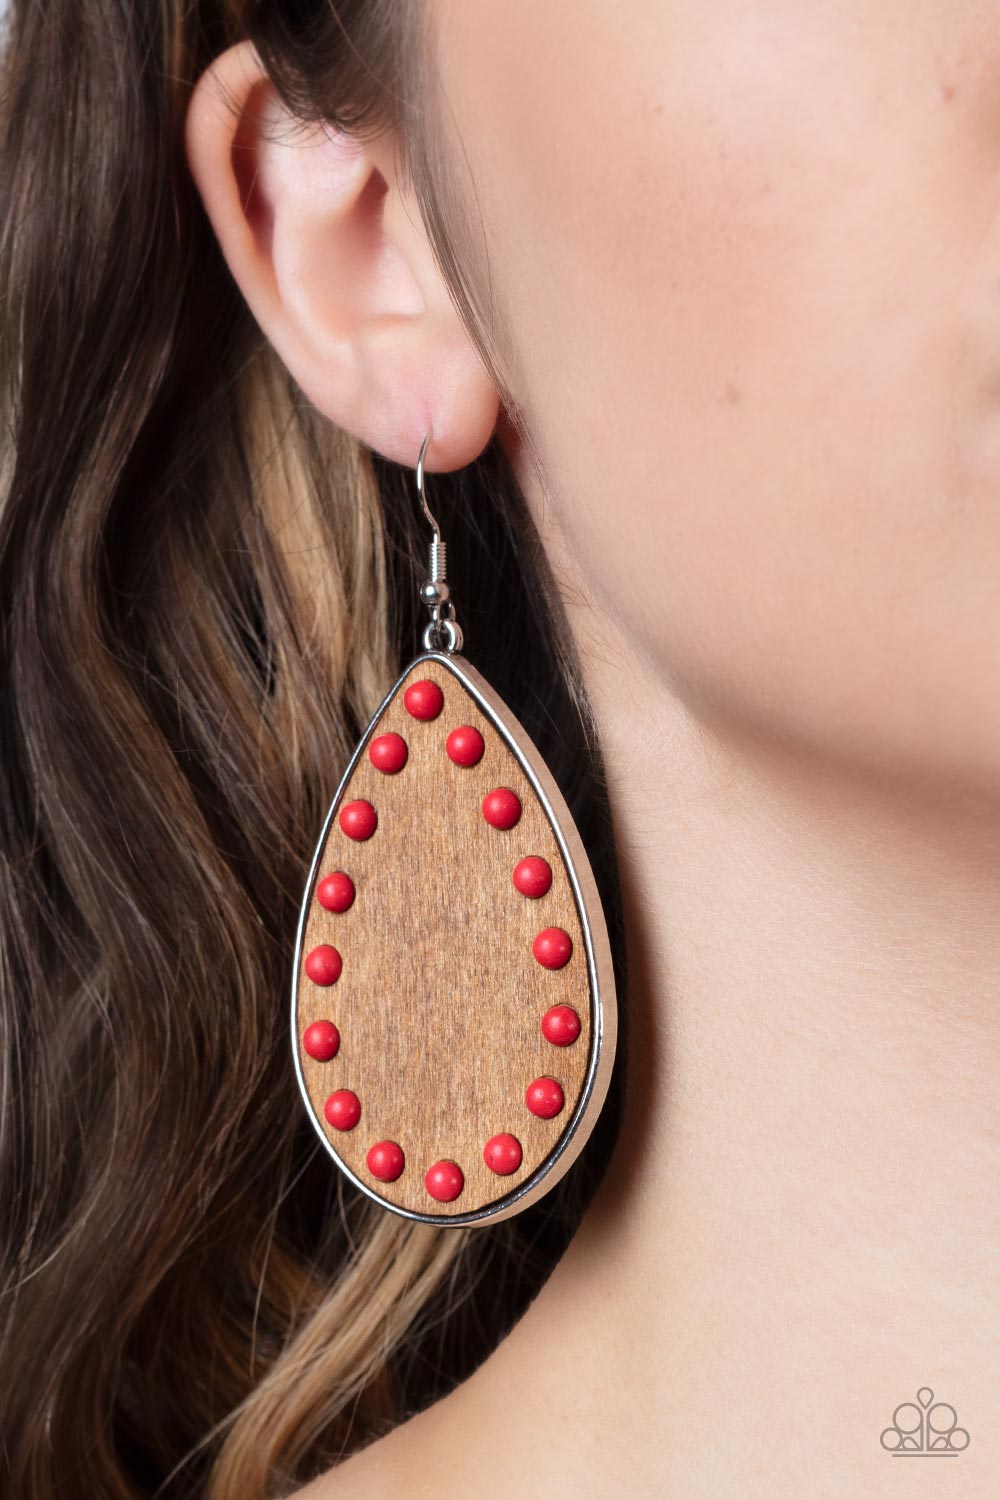 Rustic Refuge Red Earring - Paparazzi Accessories  Dainty red stone beads border an earthy wooden teardrop frame that is encased in a sleek silver fitting, creating a whimsical woodsy lure. Earring attaches to a standard fishhook fitting.  Sold as one pair of earrings.